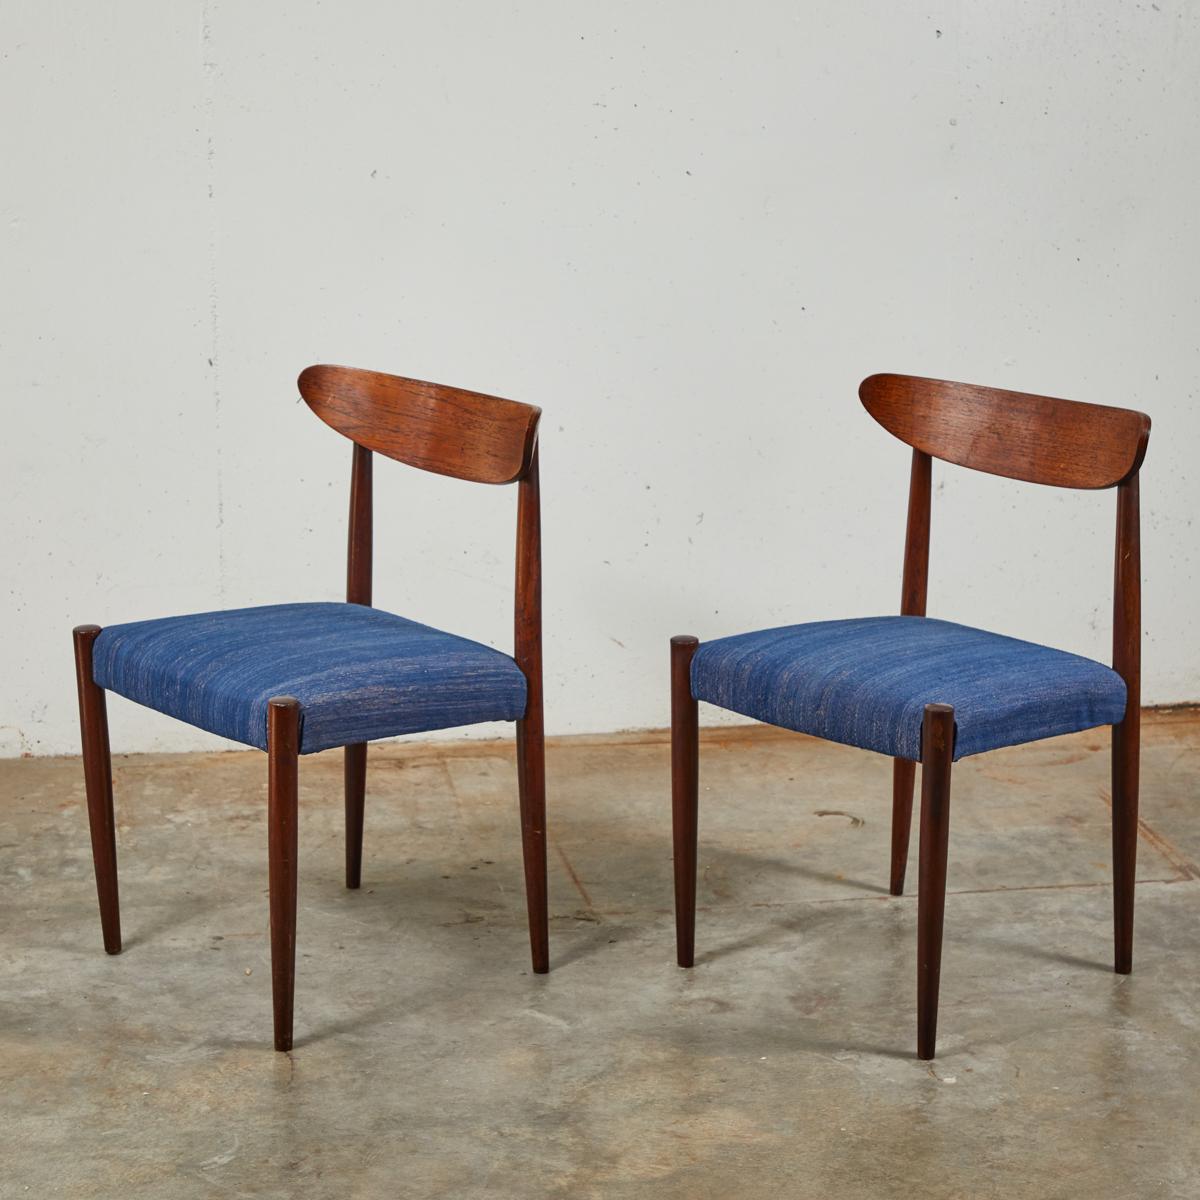 Pair of Mid century dining chairs with tapered legs upholstered in a textured blue fabric. 